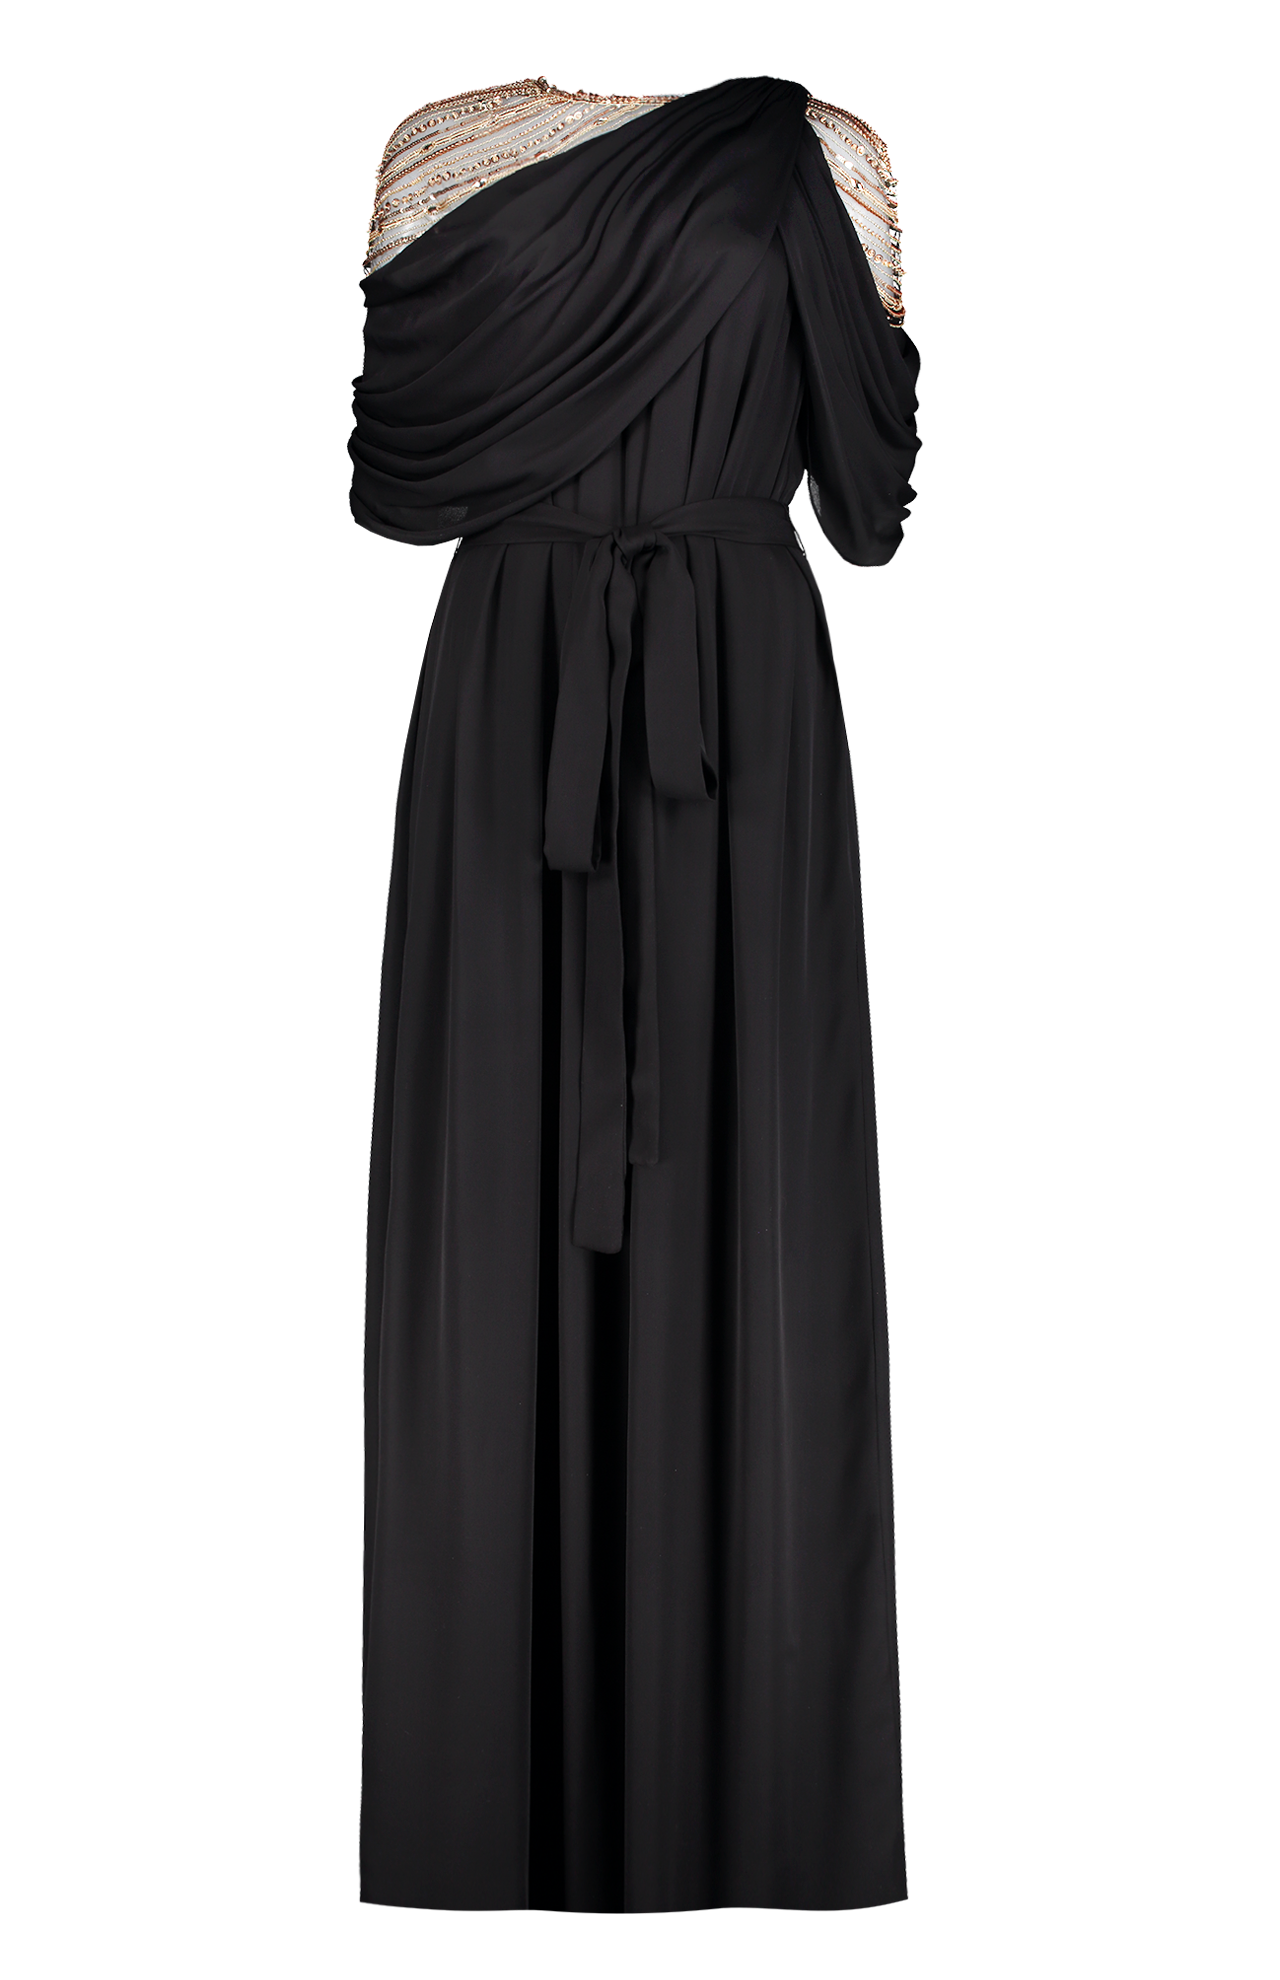 Pamella Roland Embroidered Chiffon Caftan Black Gold Front Mannequin Image (7058012995699)